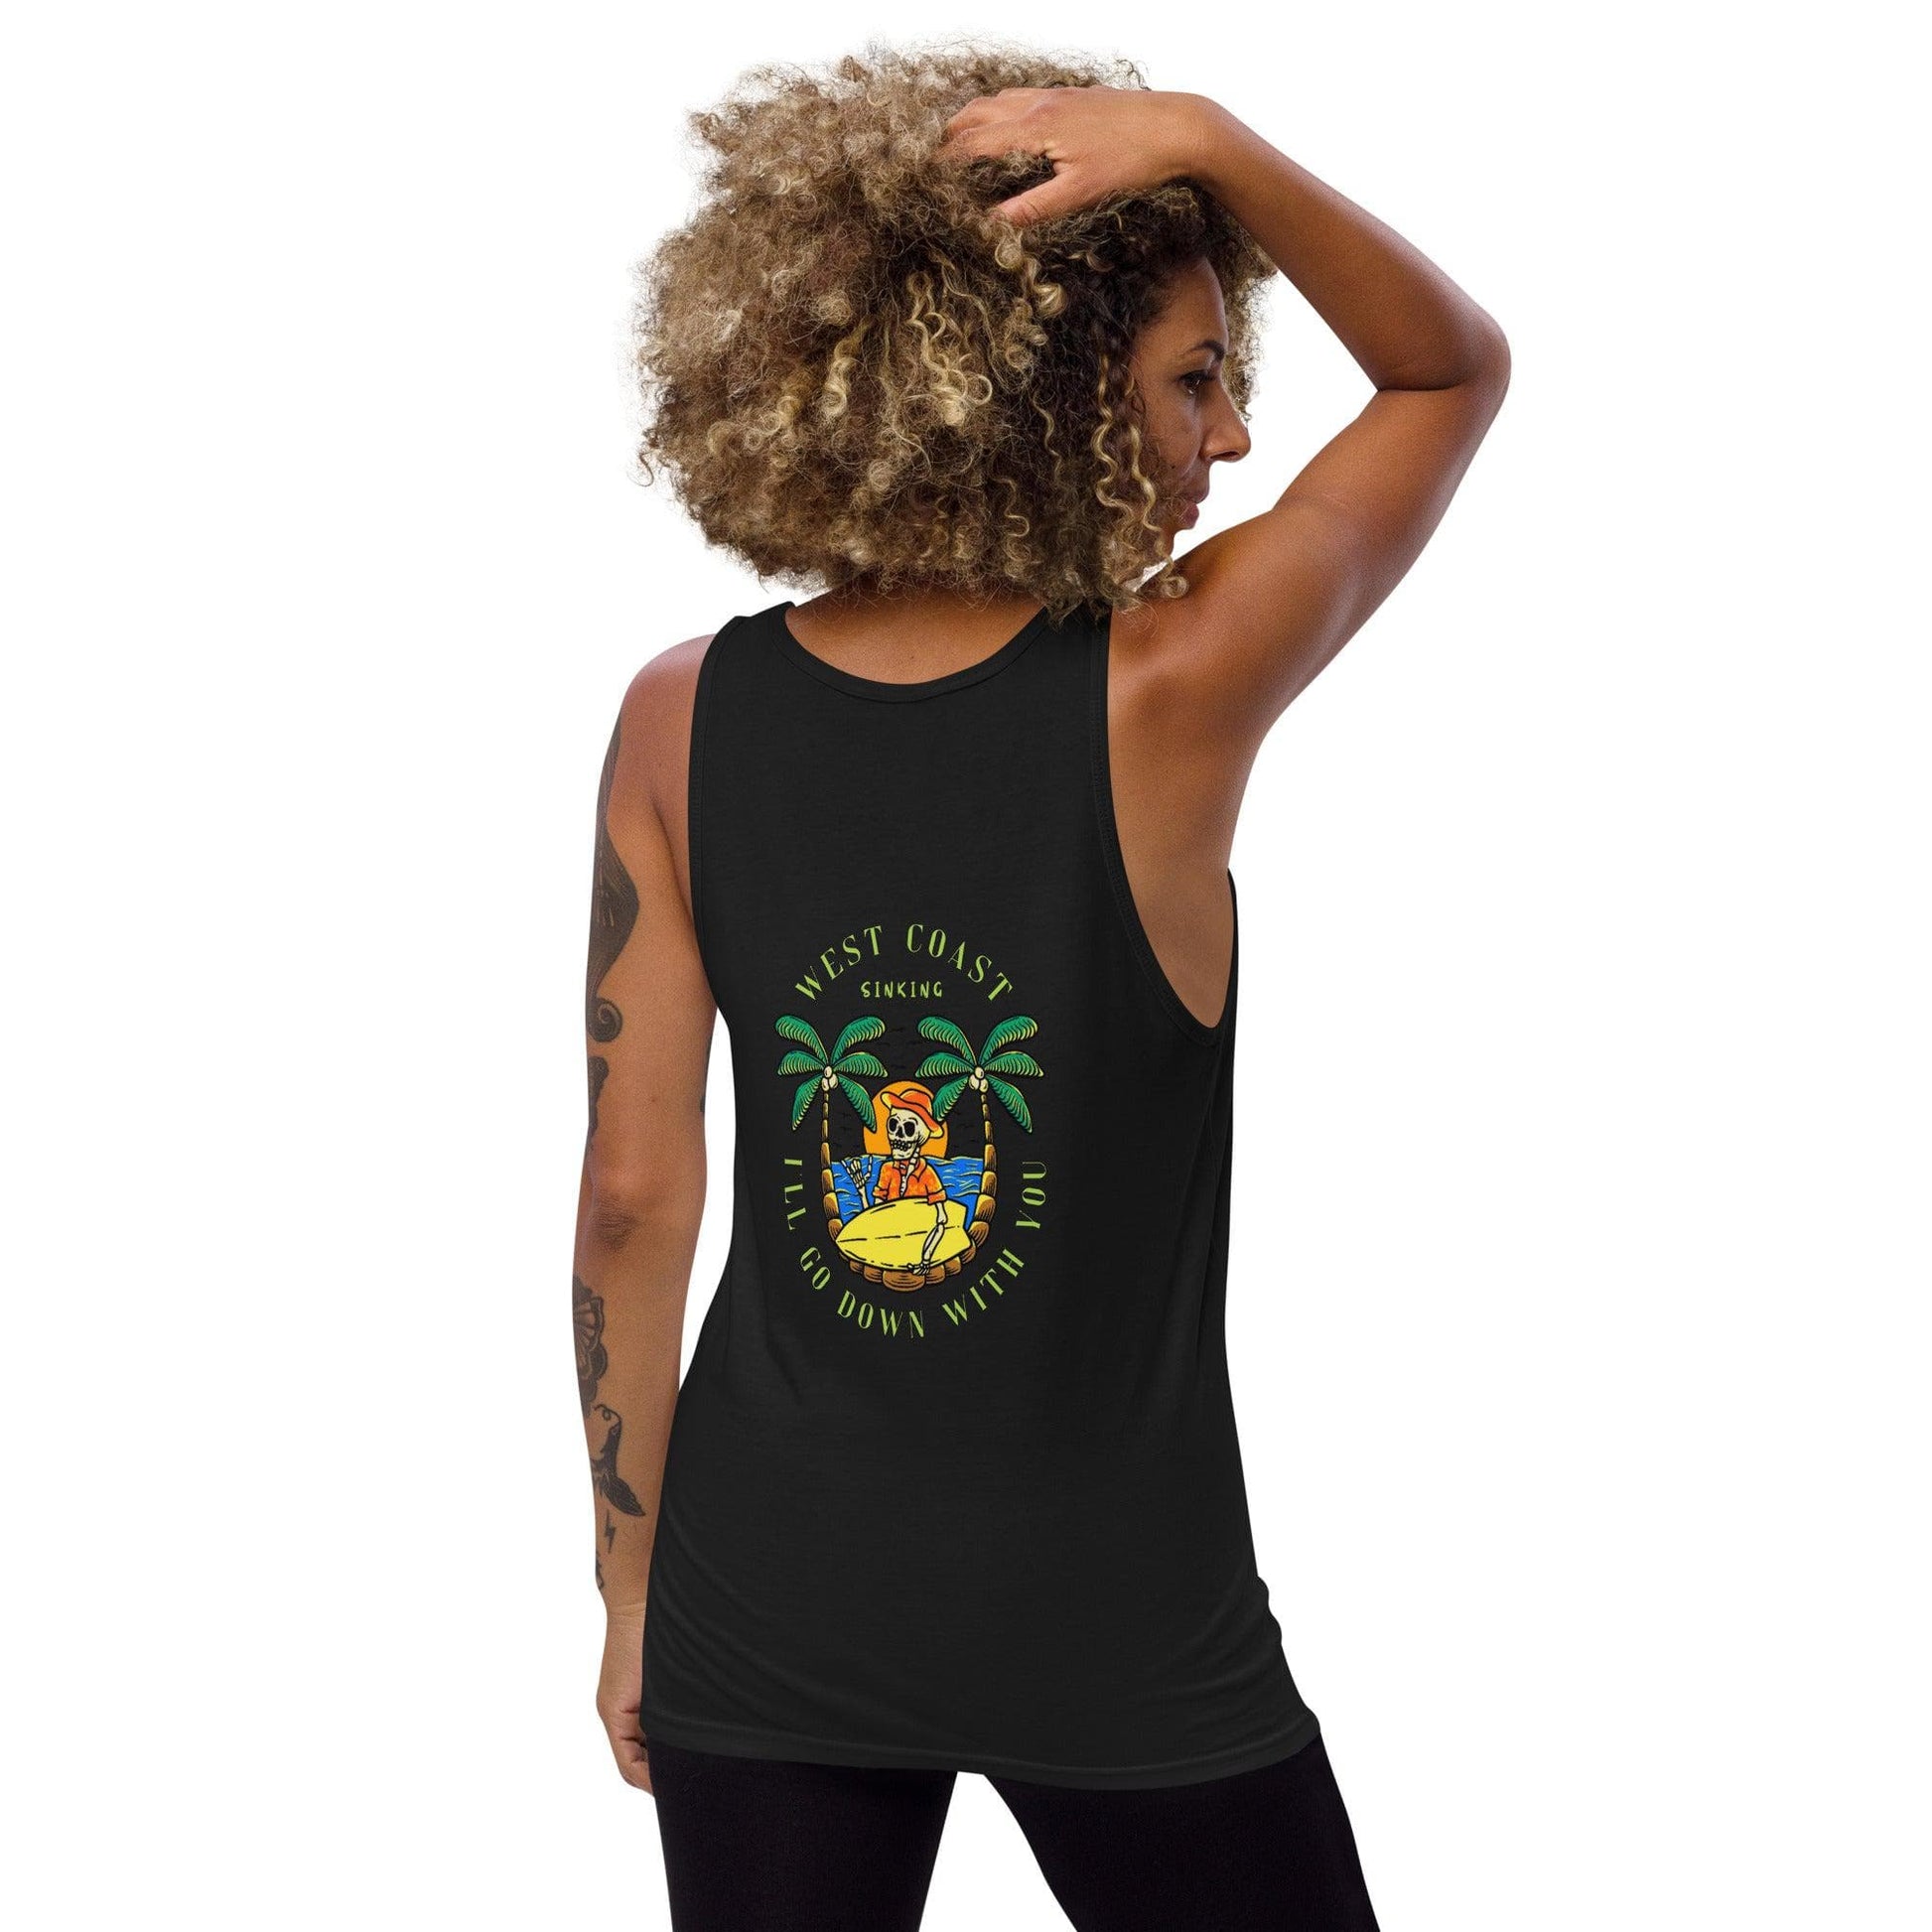 Local Summer Collective Black / XS West Coast Sinking Unisex Tank Top